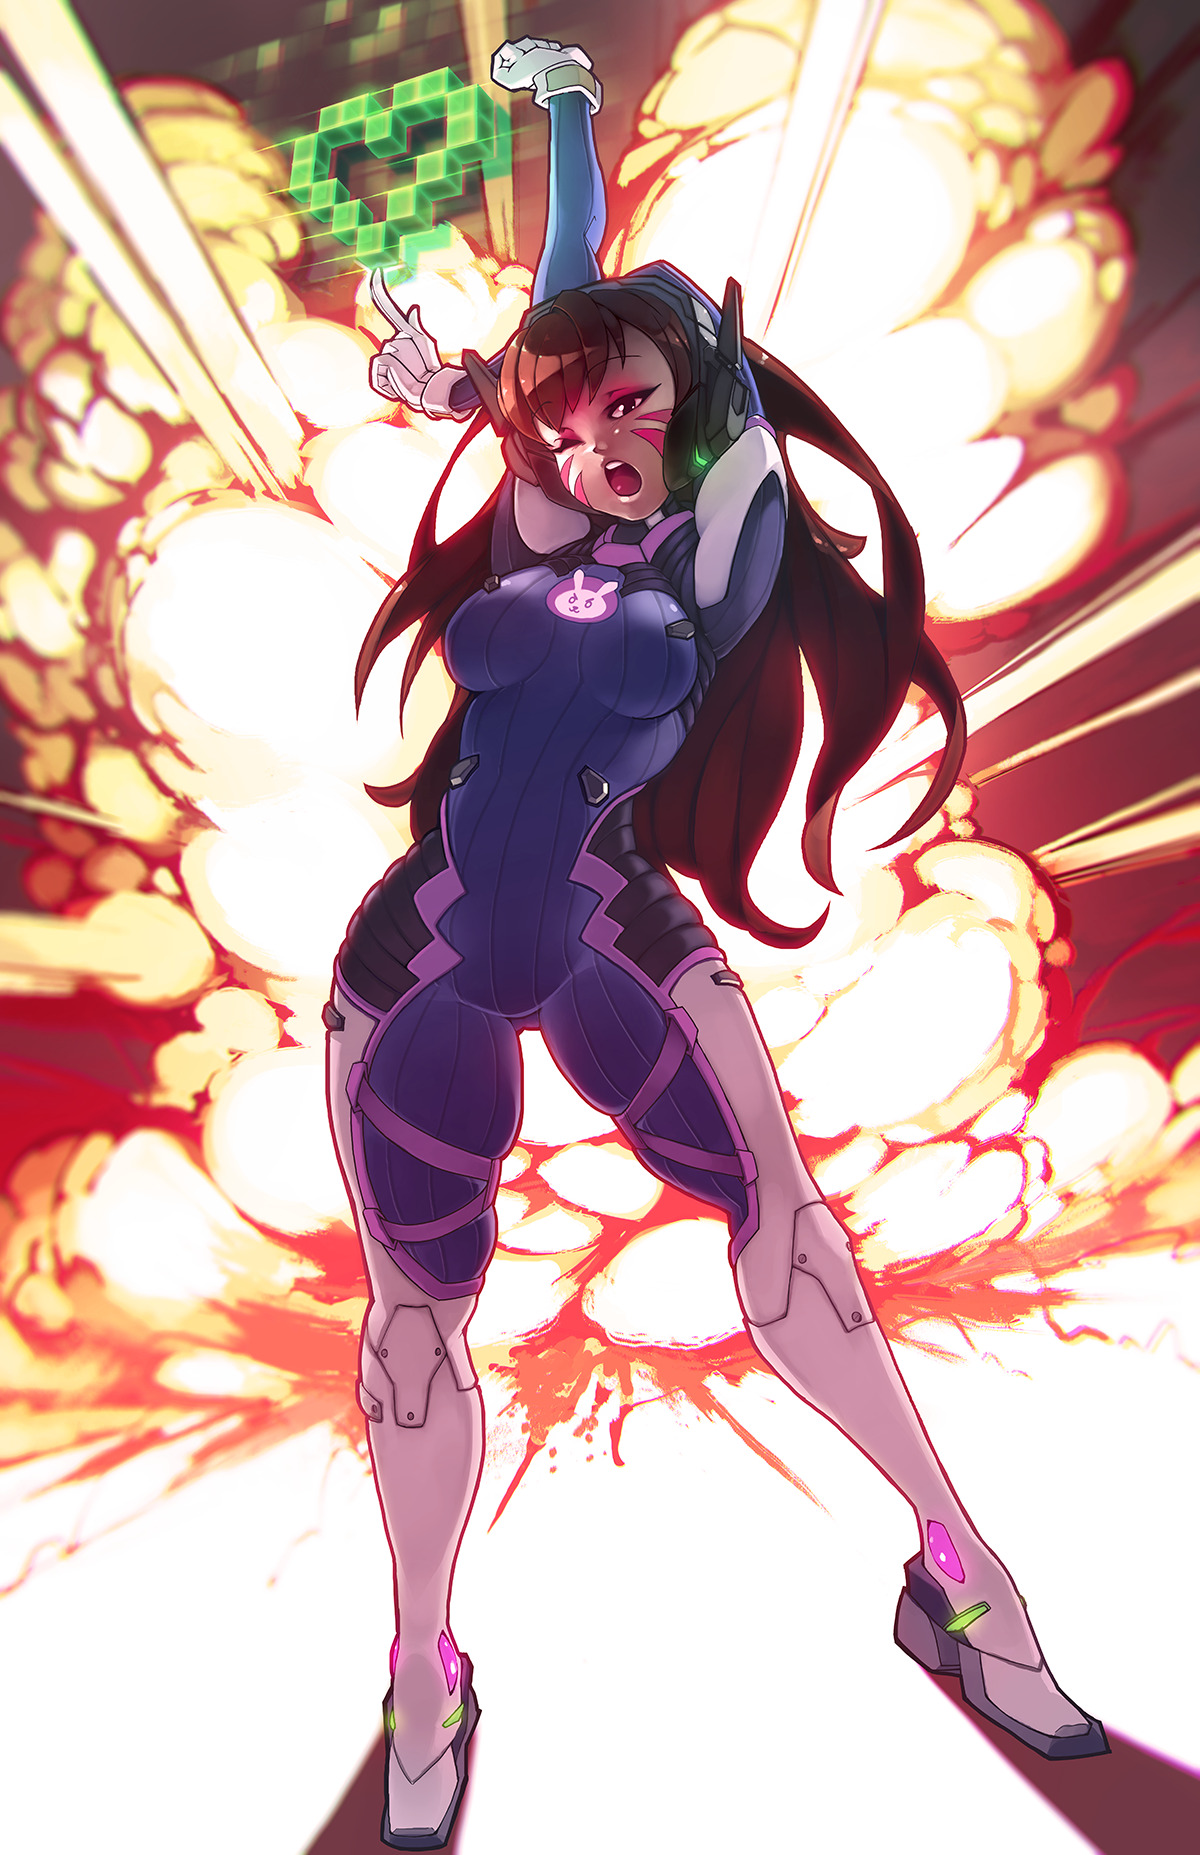 rtilrtil:  EXPLOSIONS ARE BORING [D.VA]D.va from Overwatch trying to stay enthusiastic